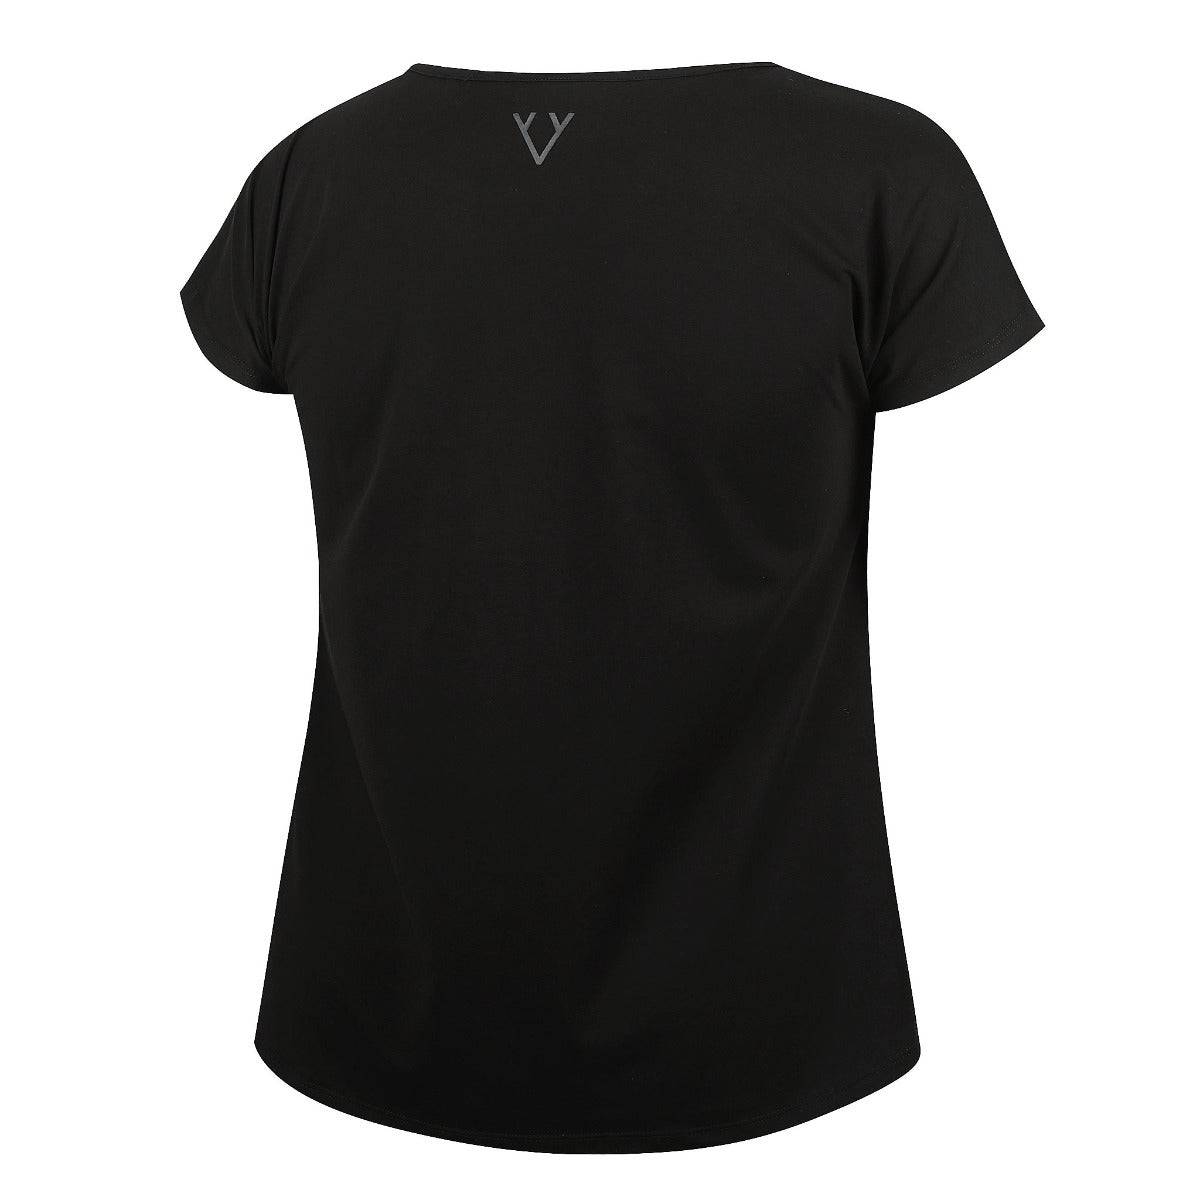 Victoria Stag Core Cap Sleeved Tee in Black V2 back